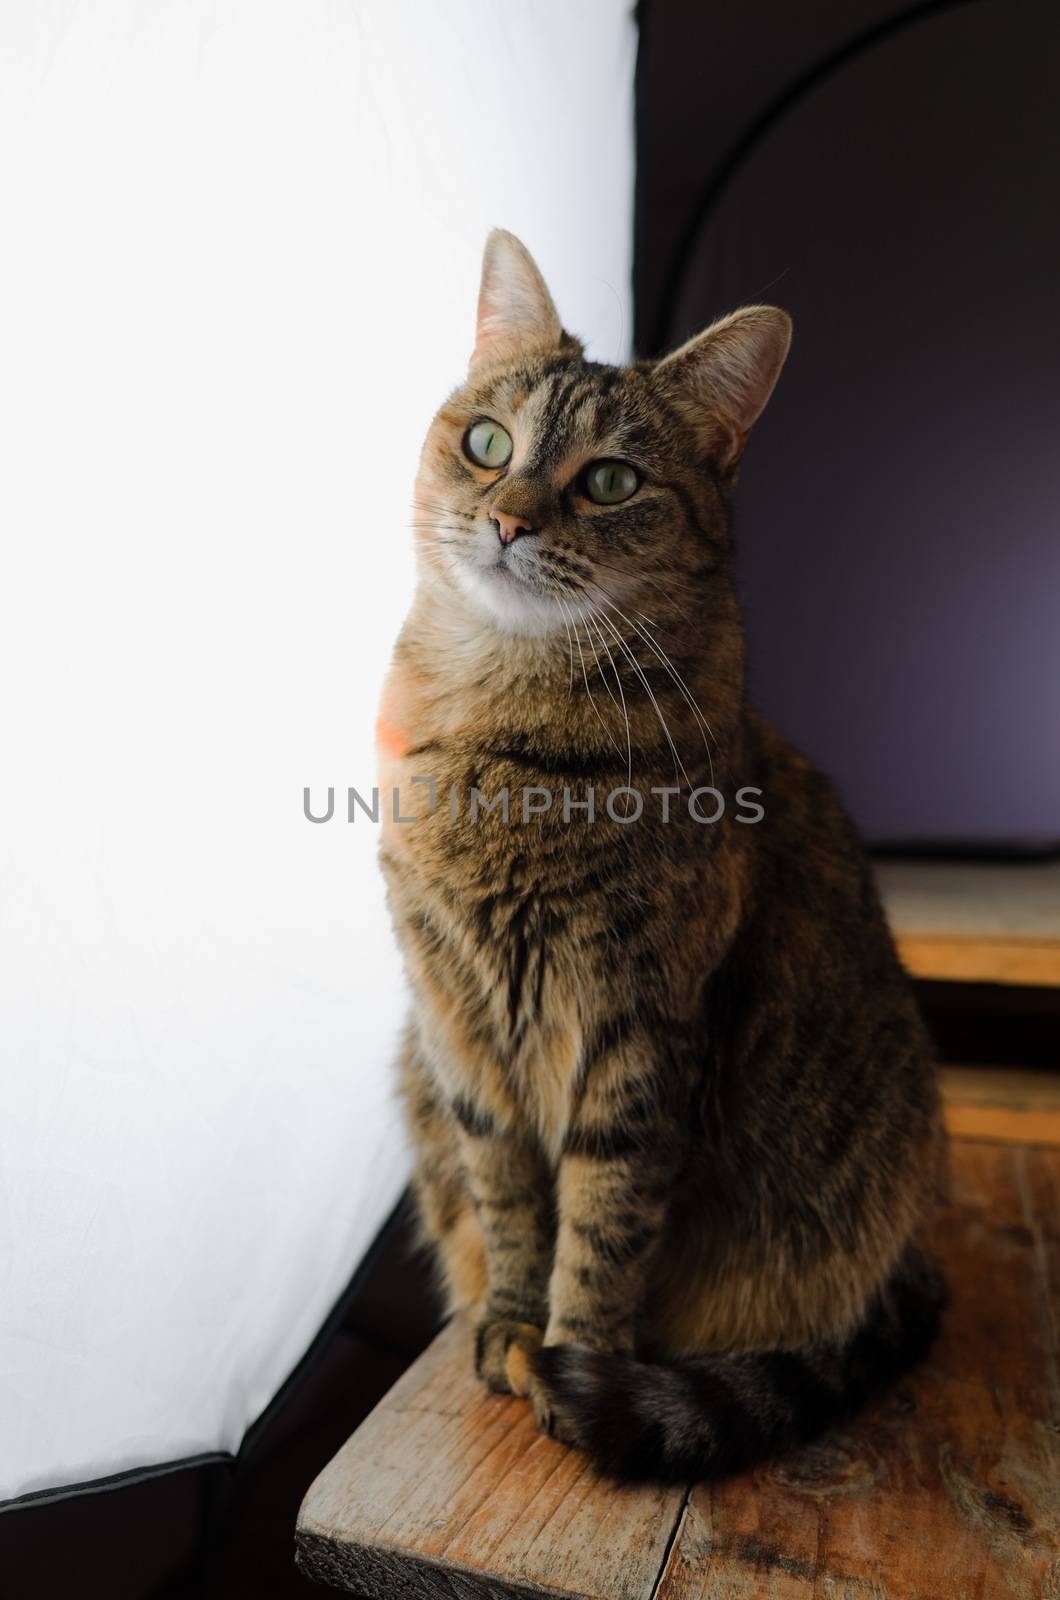 DSLR photograph of a tabby cat sitting on a rustic wooden table beside a huge studio softbox with a wooden pallet that has a coffee mug and a paper notebook on it in the background.